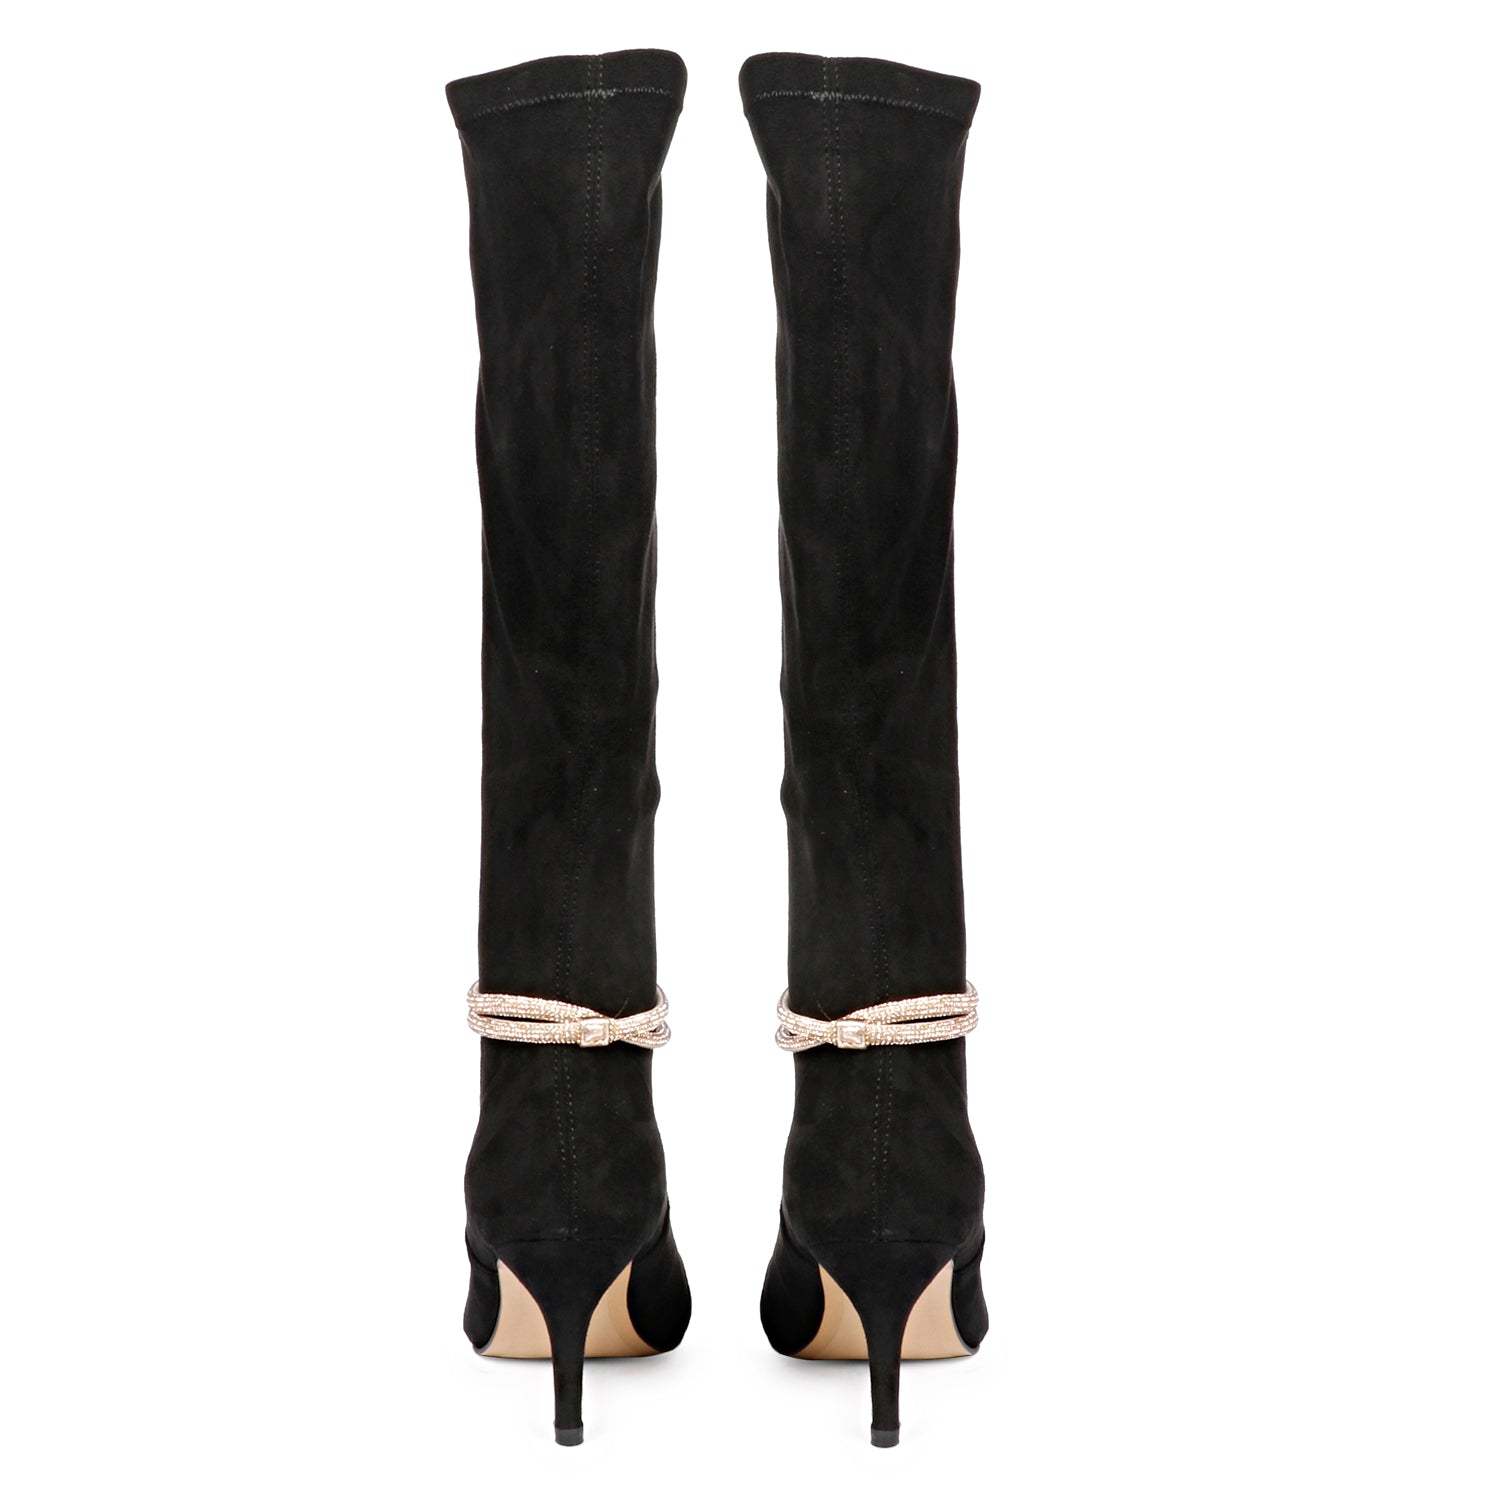 Sam Edelman Issabel Wide Calf Knee High Boot | Women's Boots and Booties